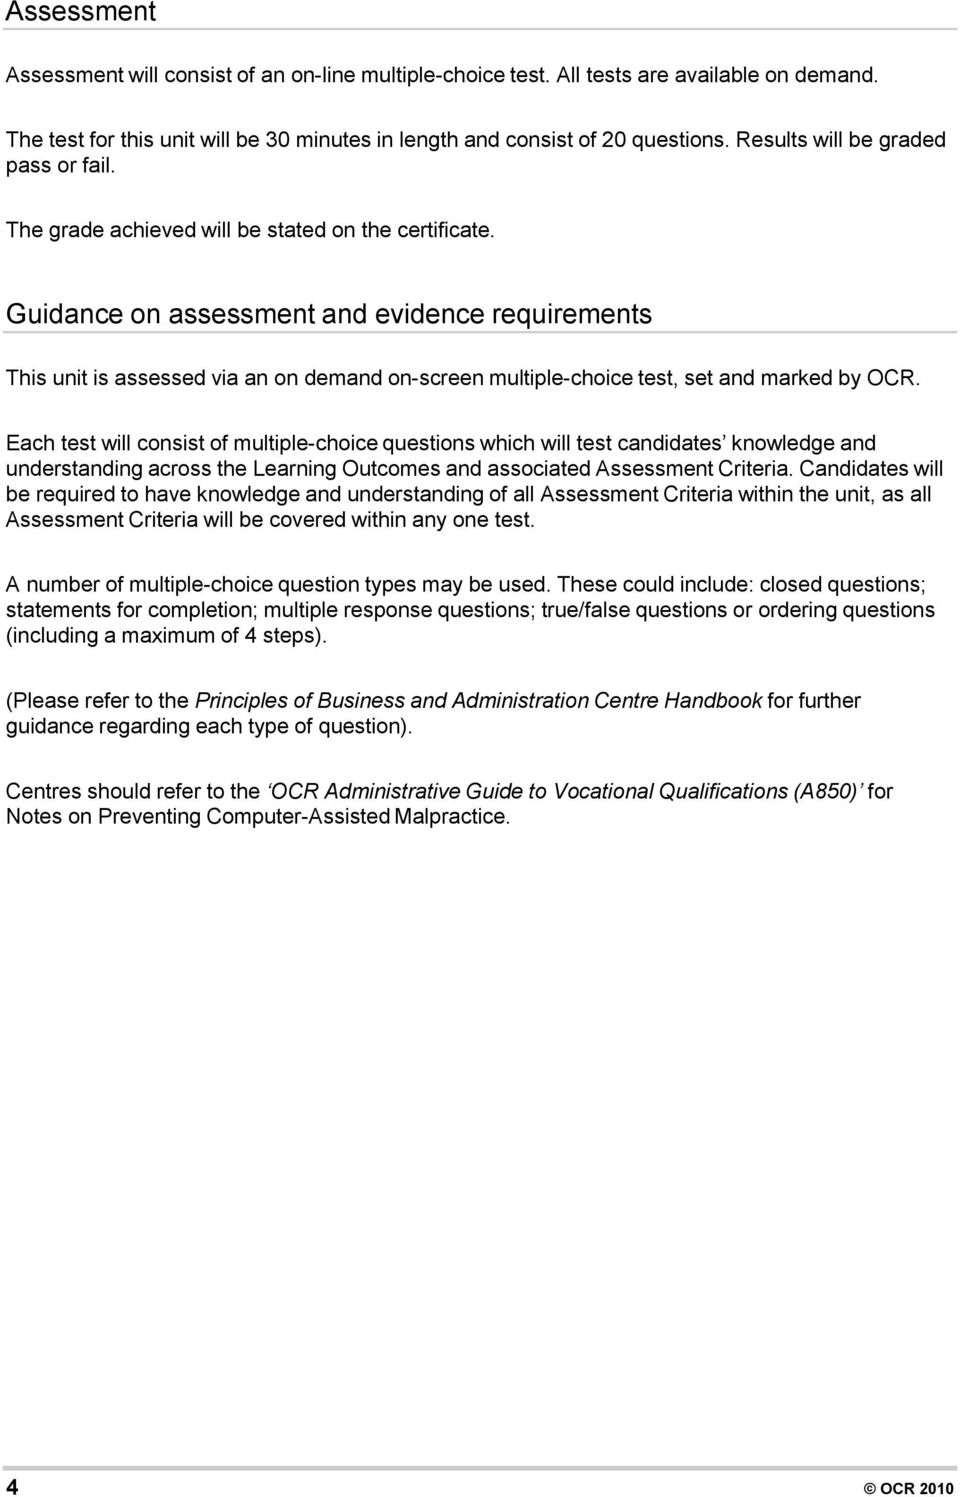 Guidance on assessment and evidence requirements This unit is assessed via an on demand on-screen multiple-choice test, set and marked by OCR.